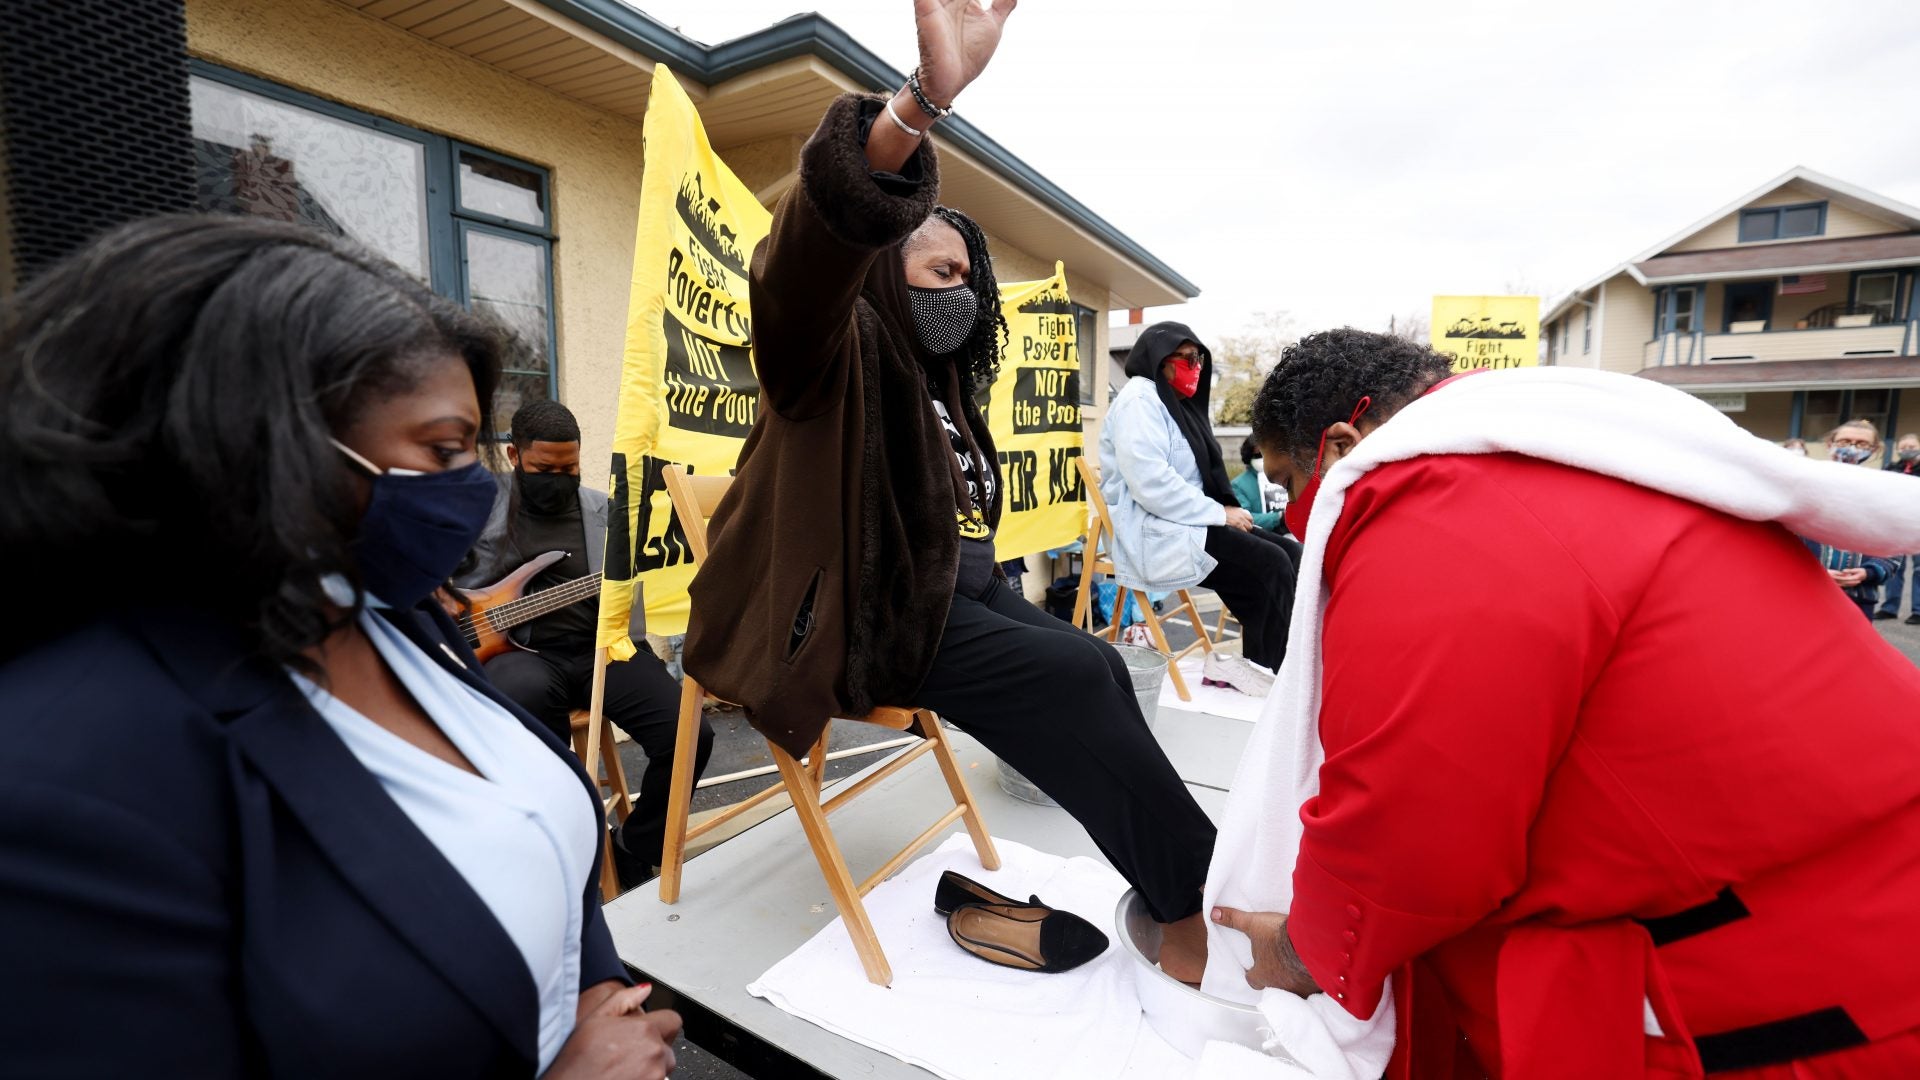 Easter Ritual: Poor People's Campaign Washes the Feet of Folks Struggling Economically